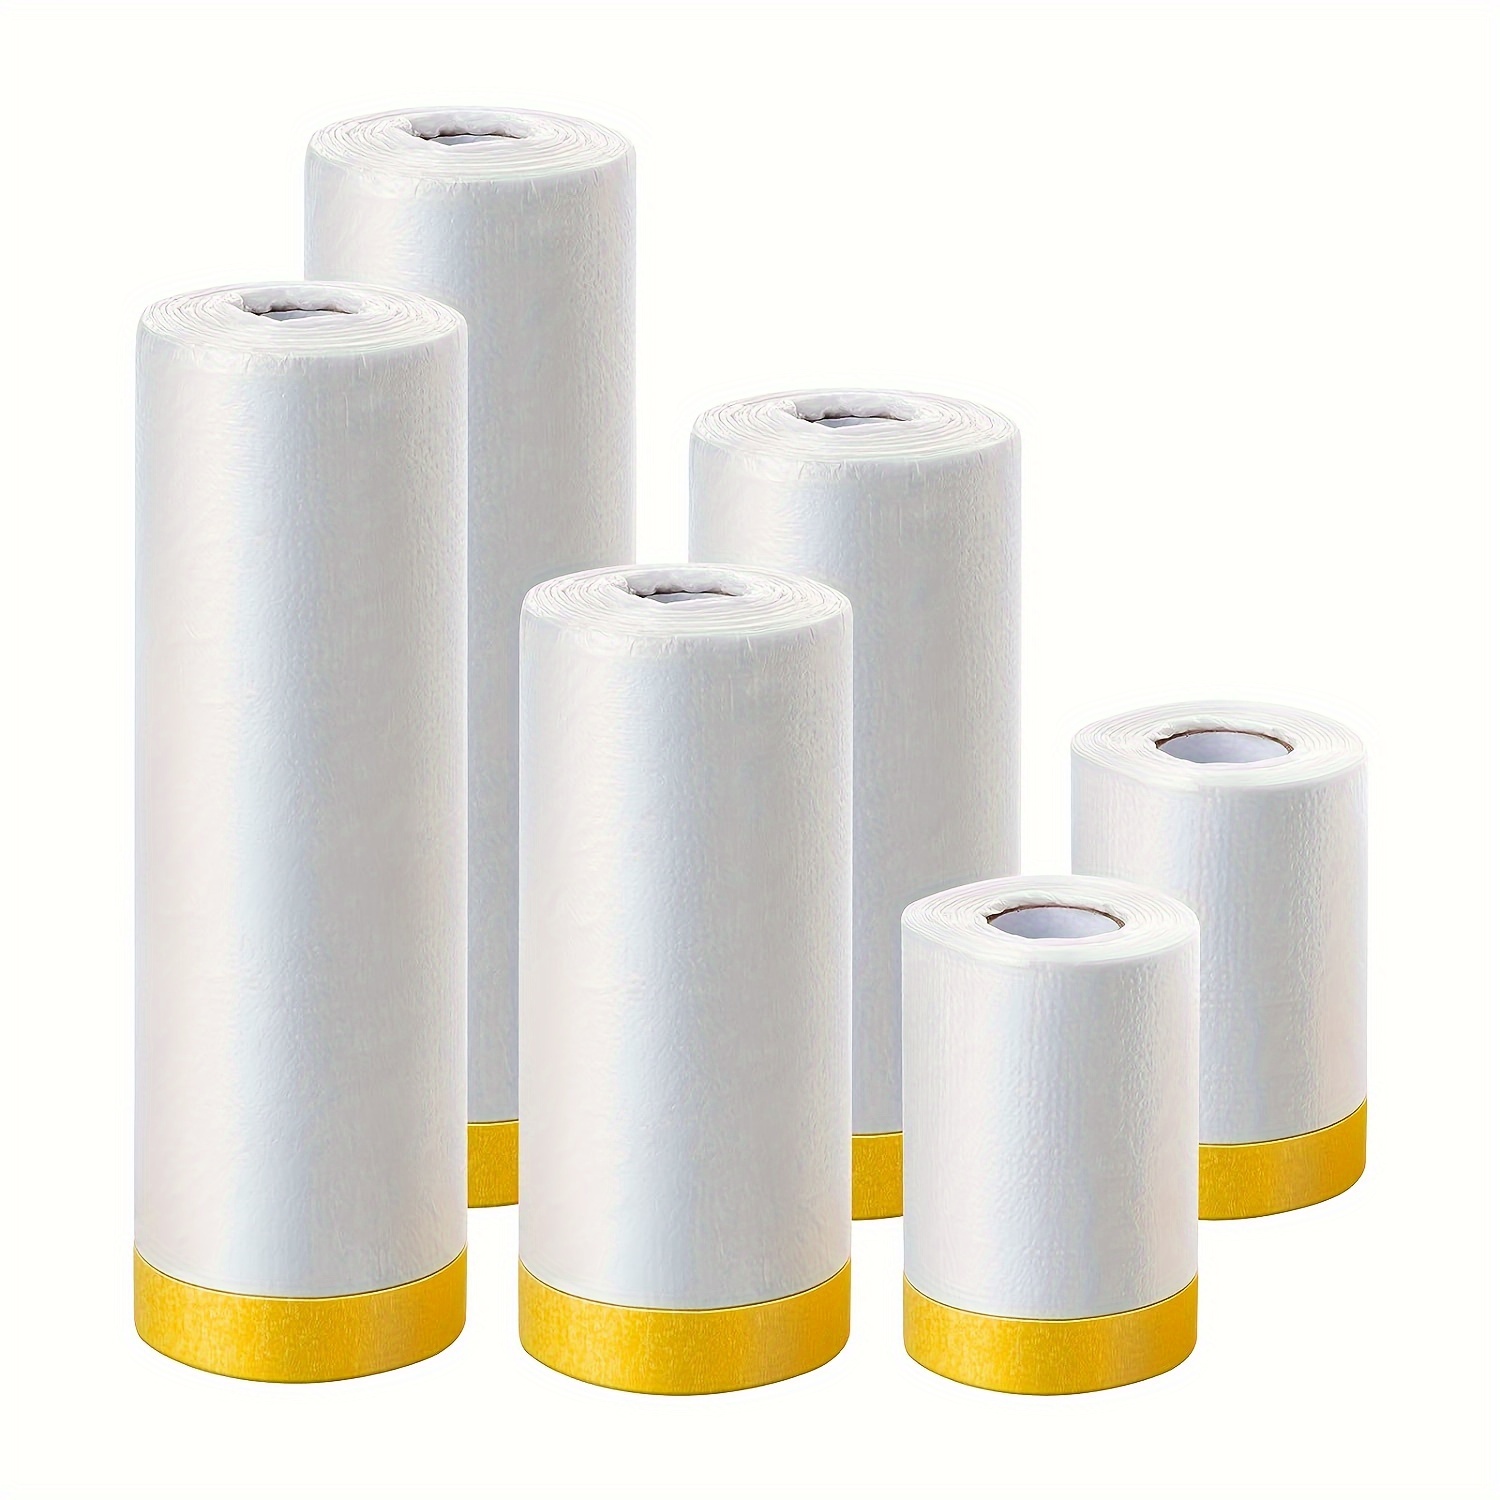 17.72inch Wrap Film Industrial Wrap Film PE Extended Packaging Plastic Film  Pe Stretch Film Protection Film